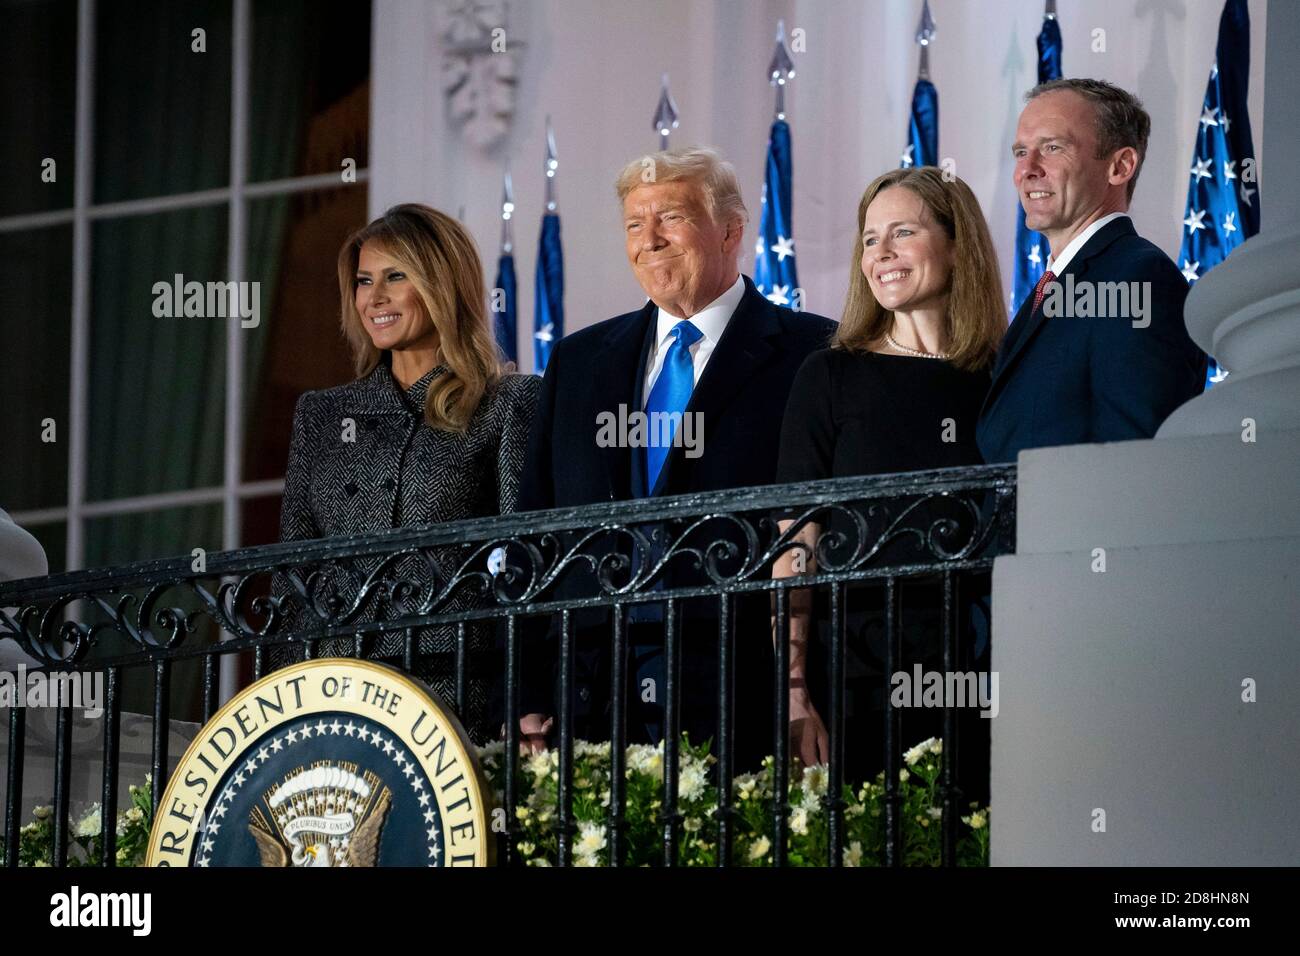 U.S President Donald Trump, First Lady Melania Trump, Supreme Court Associate Justice Amy Coney Barrett, and her husband Jesse Barrett greet invited guests from the Blue Room Balcony of the White House October 26, 2020 in Washington, DC. Stock Photo